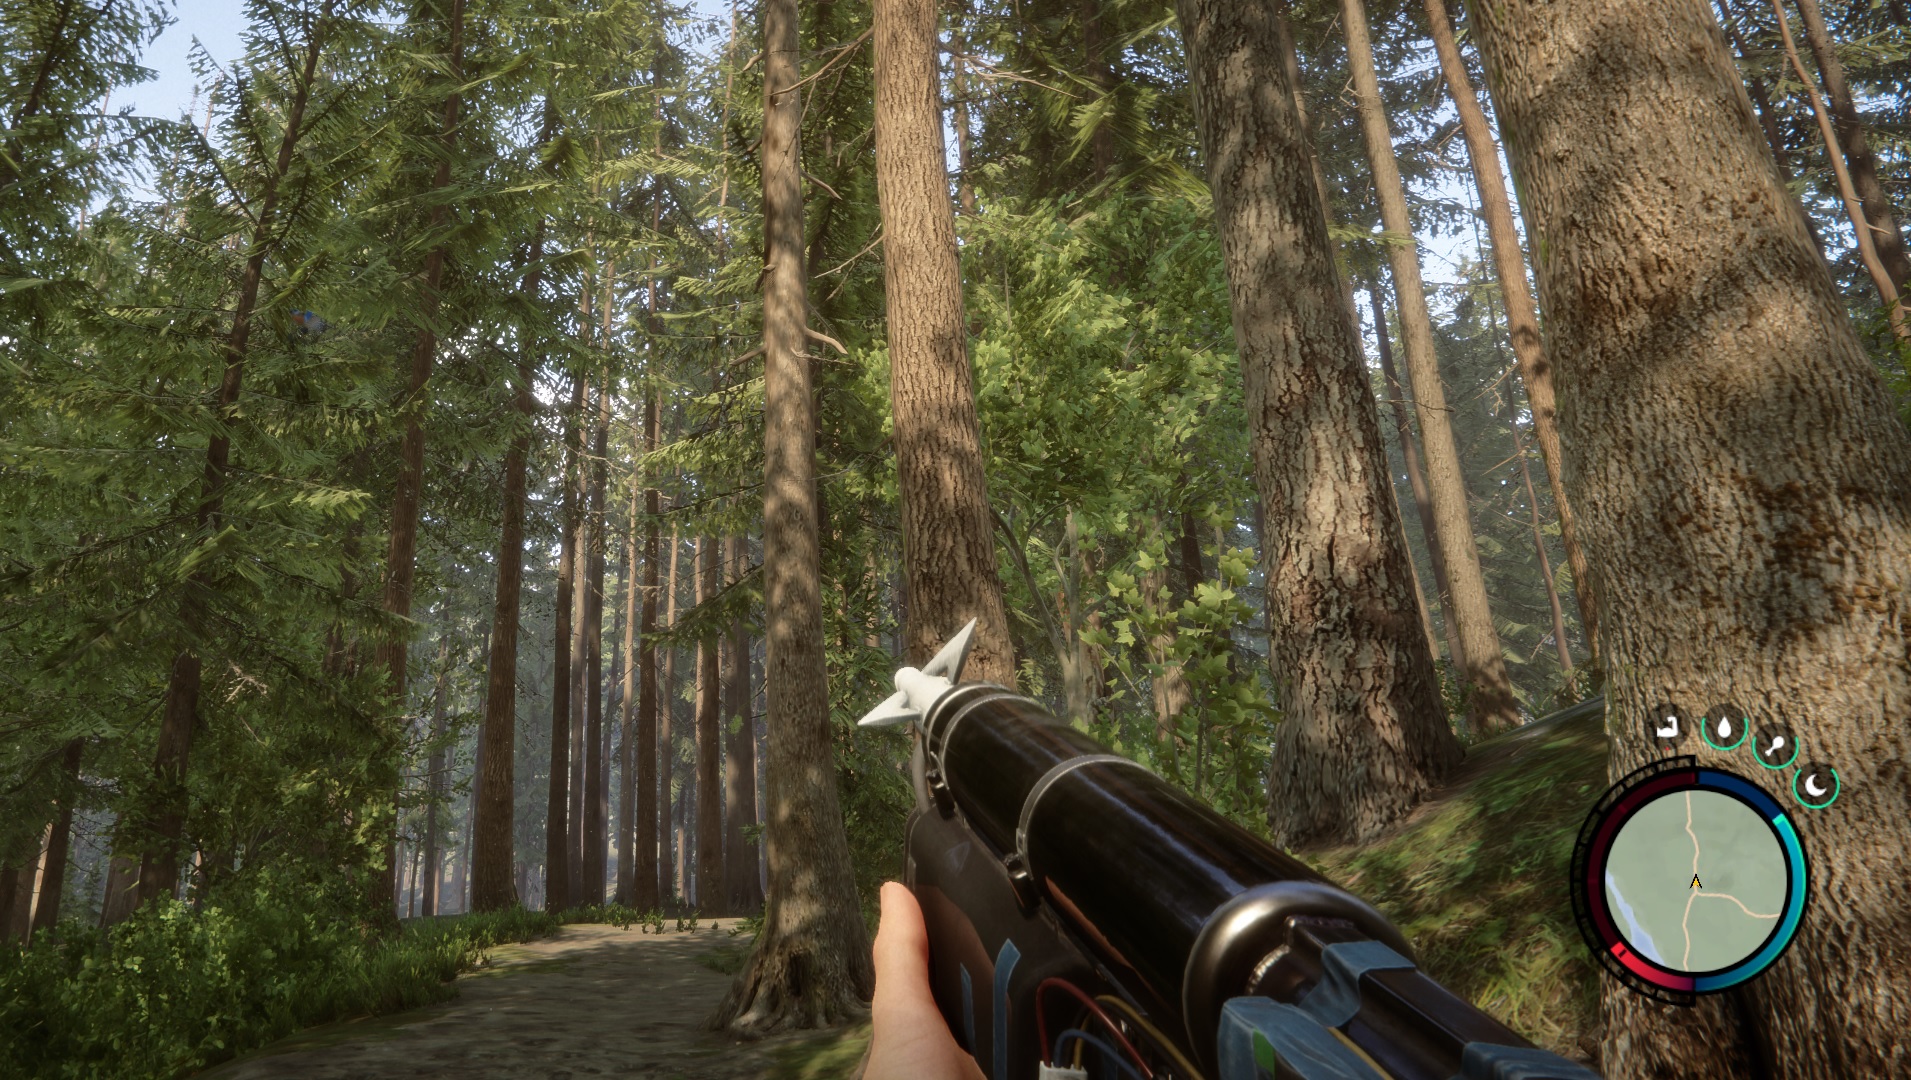 Sons of the Forest: Rope Gun location, plus where to find rope - Polygon